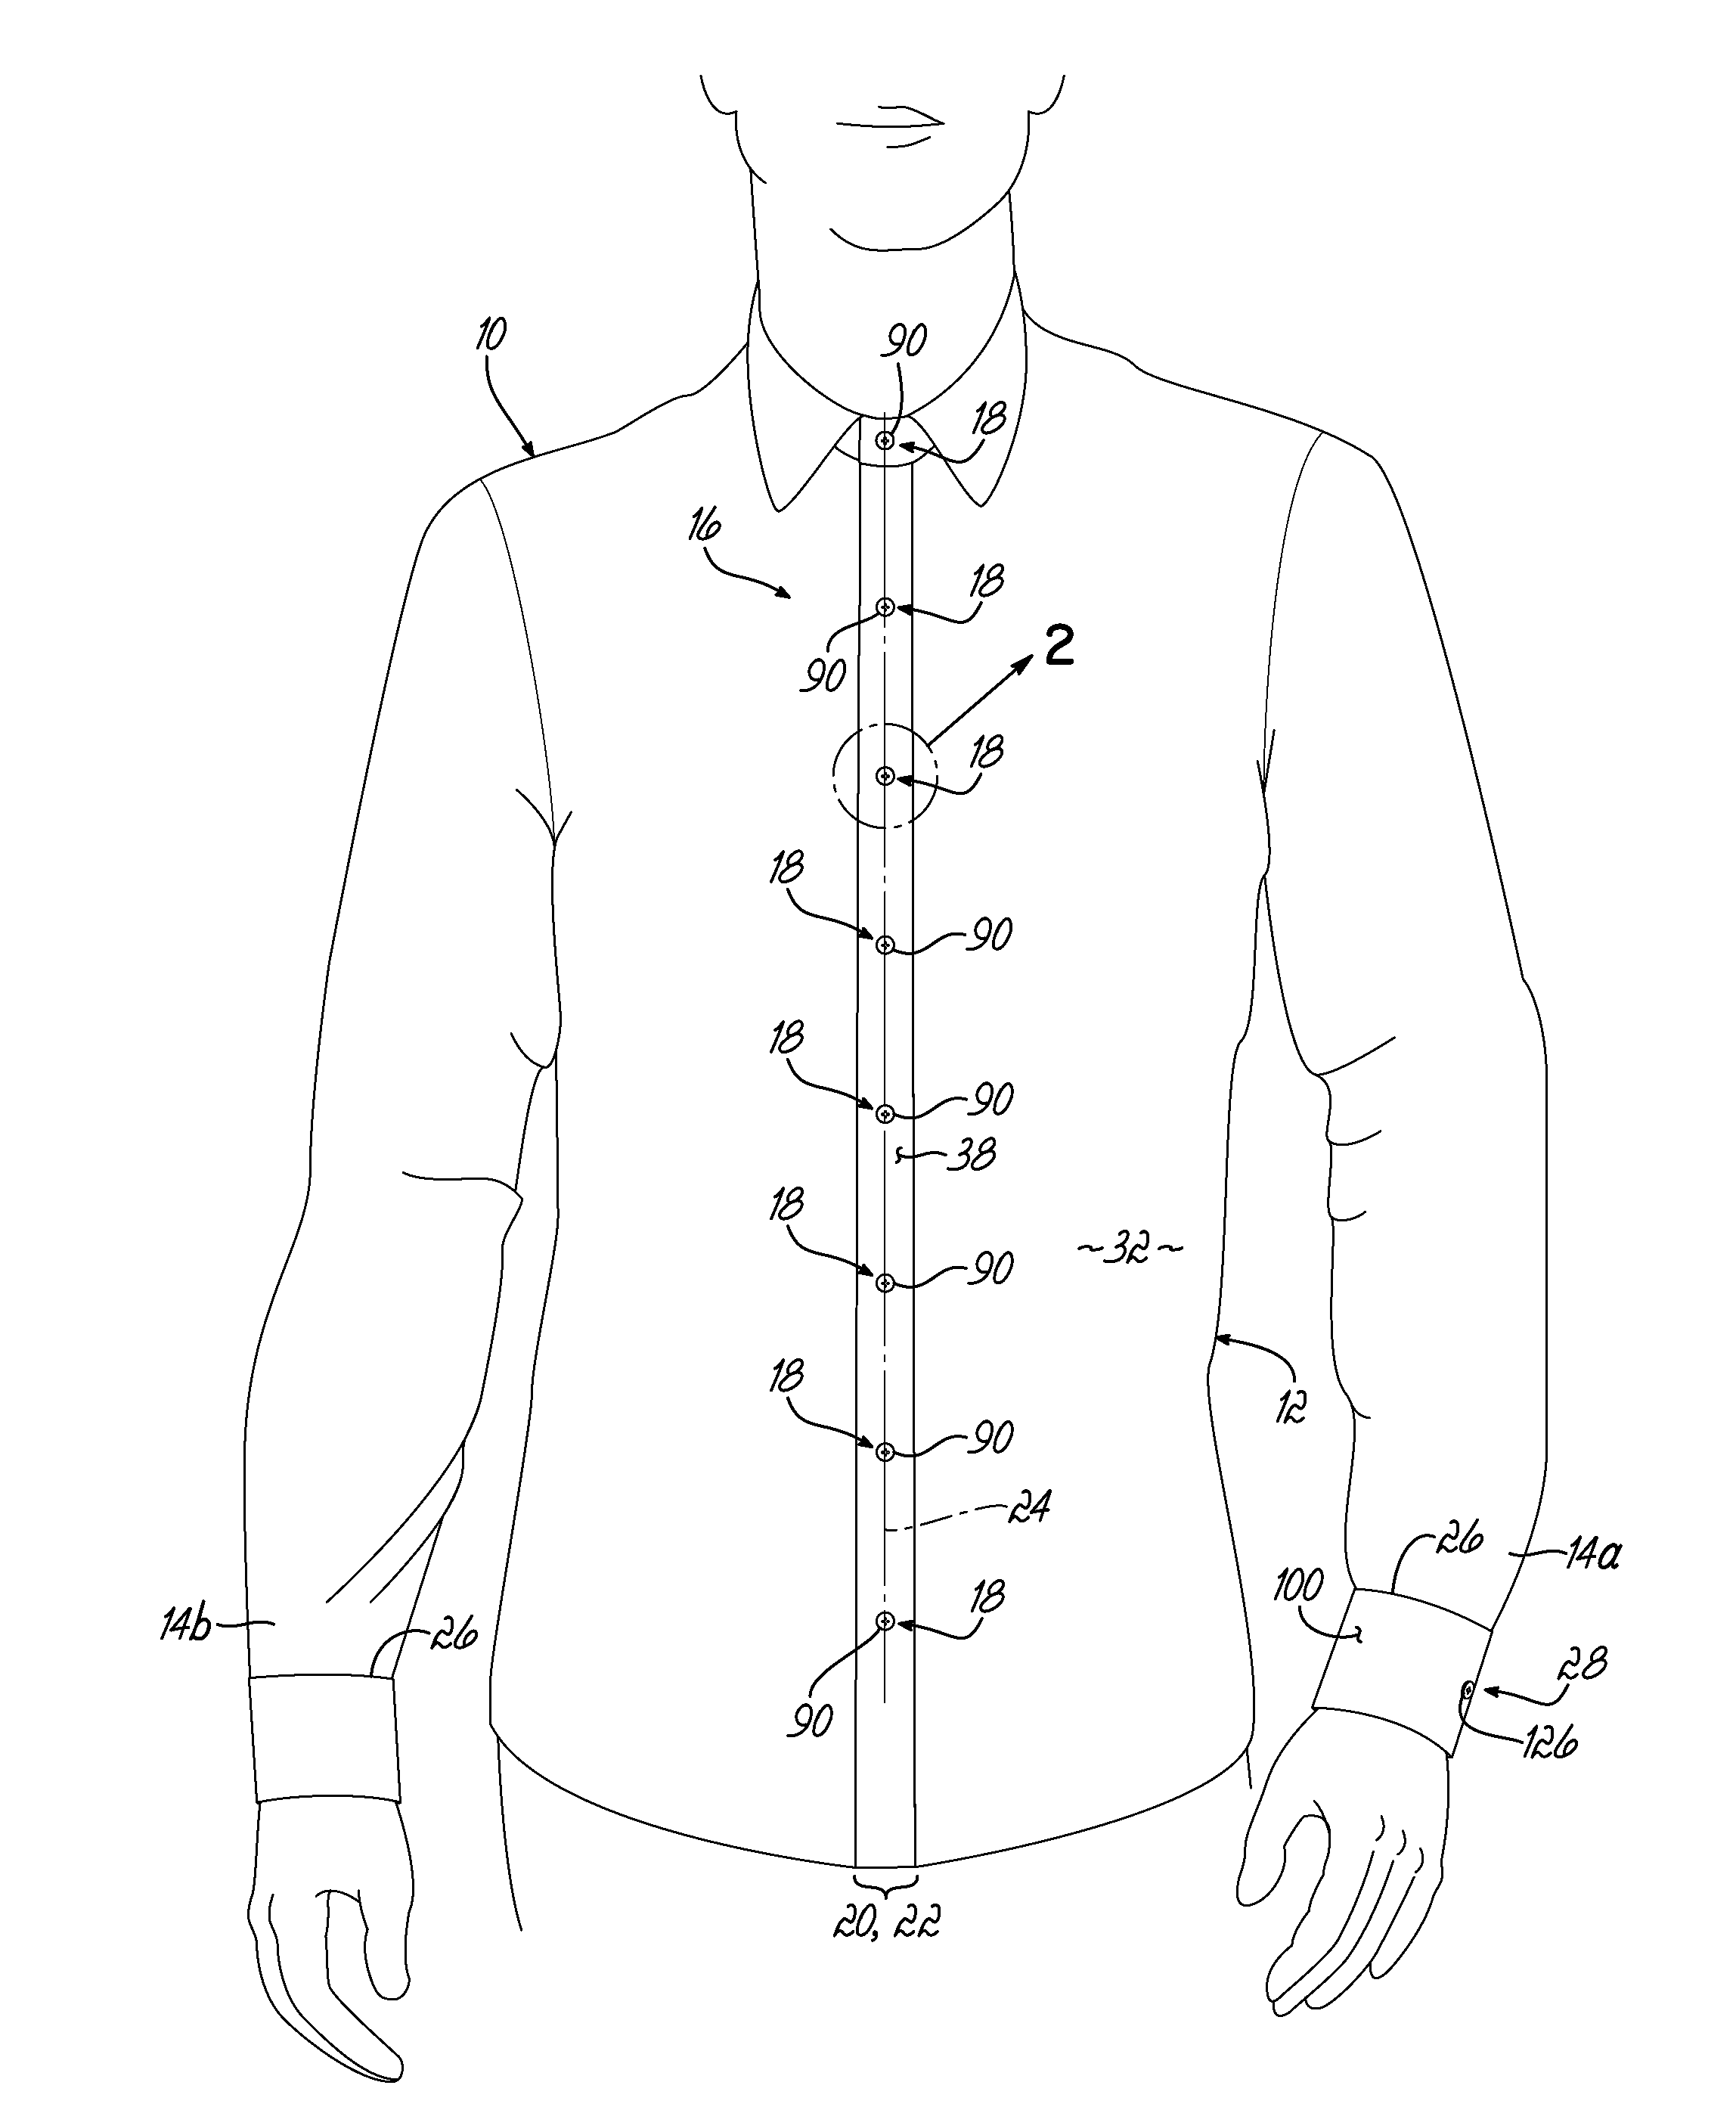 Article Of Clothing Having At Least One Magnetic Fastening Assembly